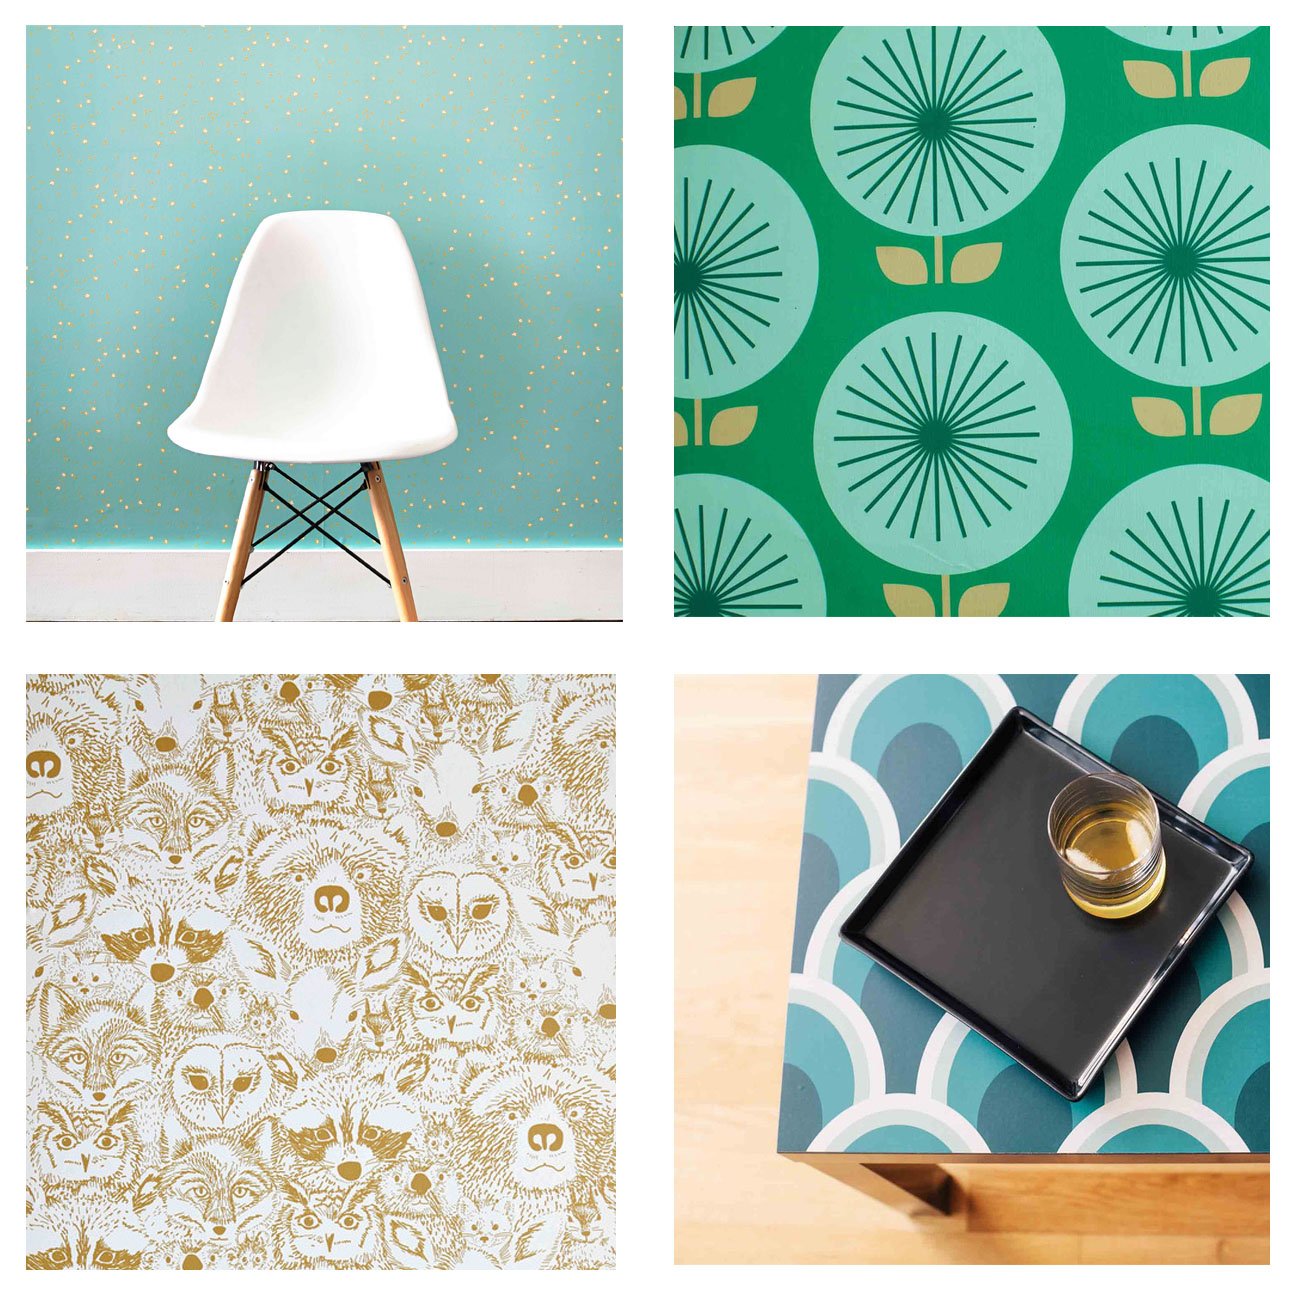 Chasing Paper Removable Wallpaper (Star Bright, top left; Sunburst, top right; Wild, bottom left; and Teal Teardrop, bottom right